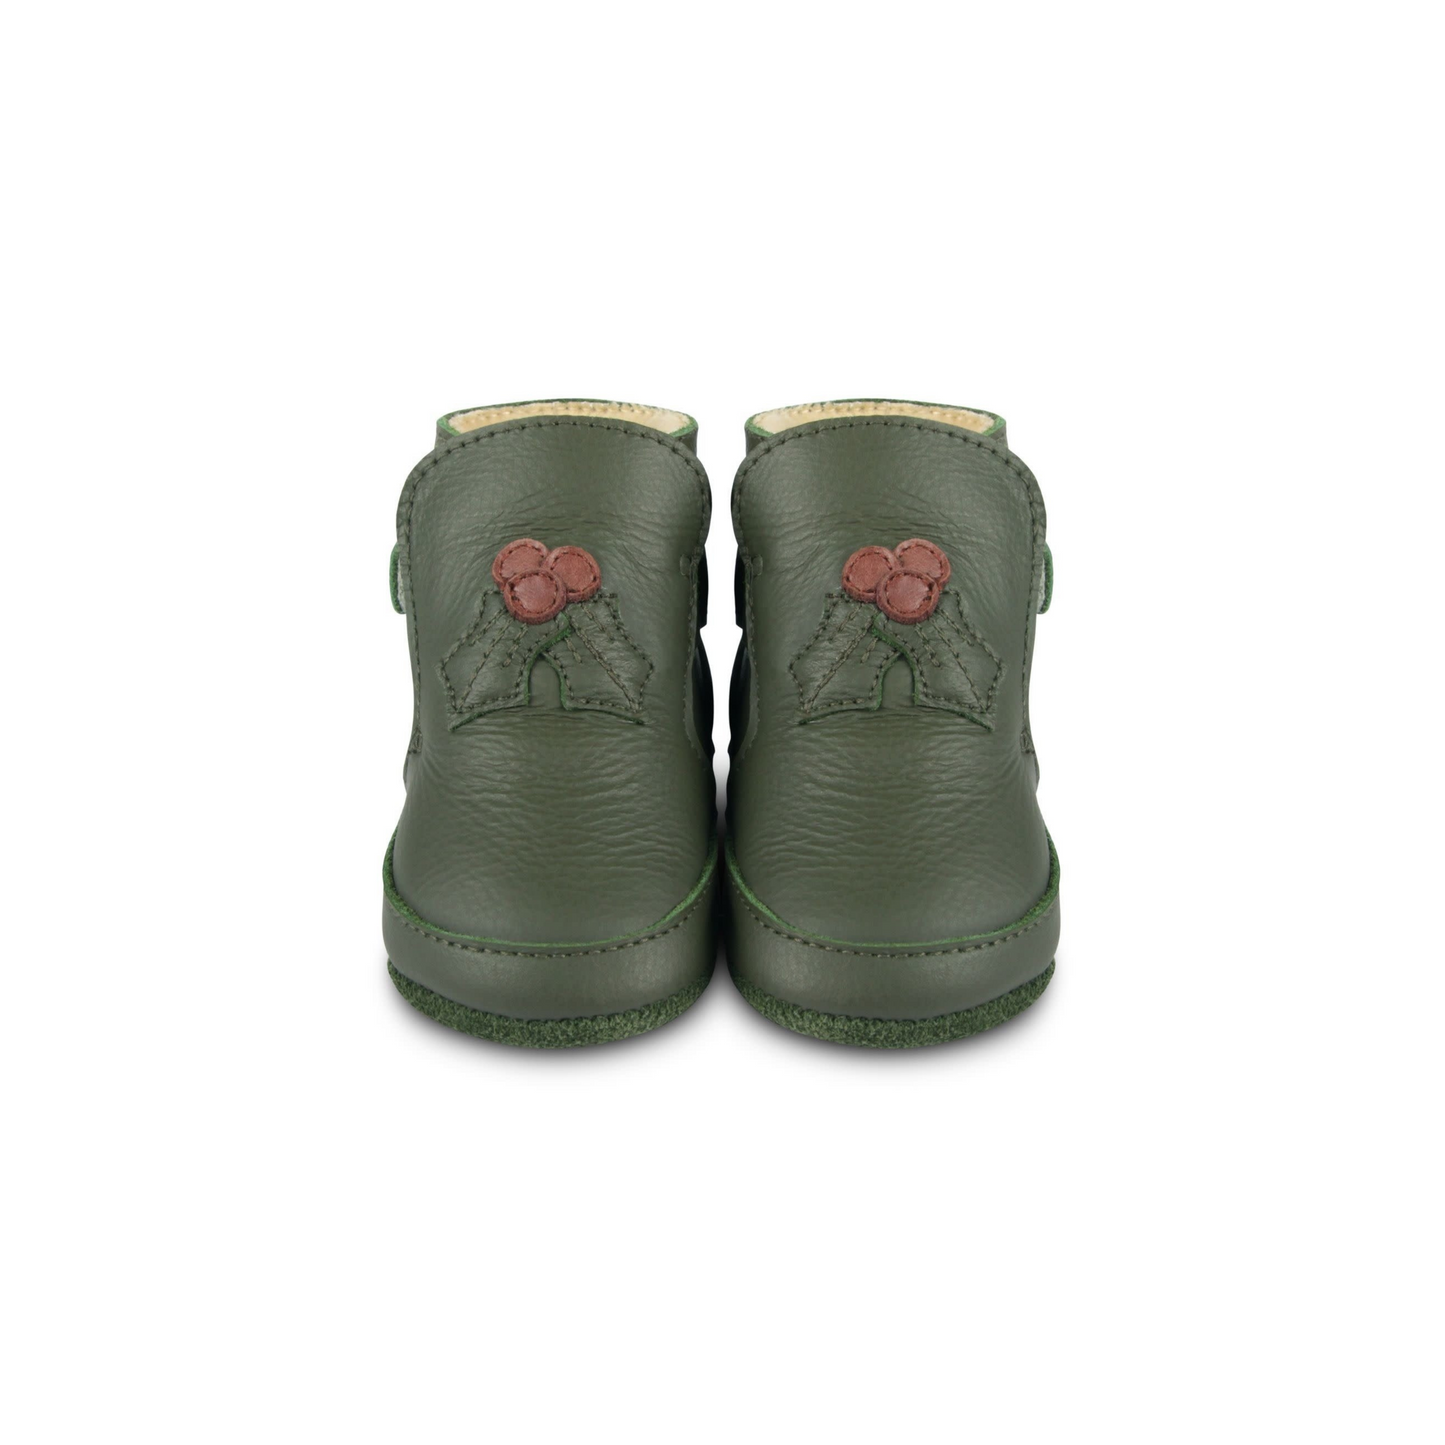 Aggas Lining Boots - Holly